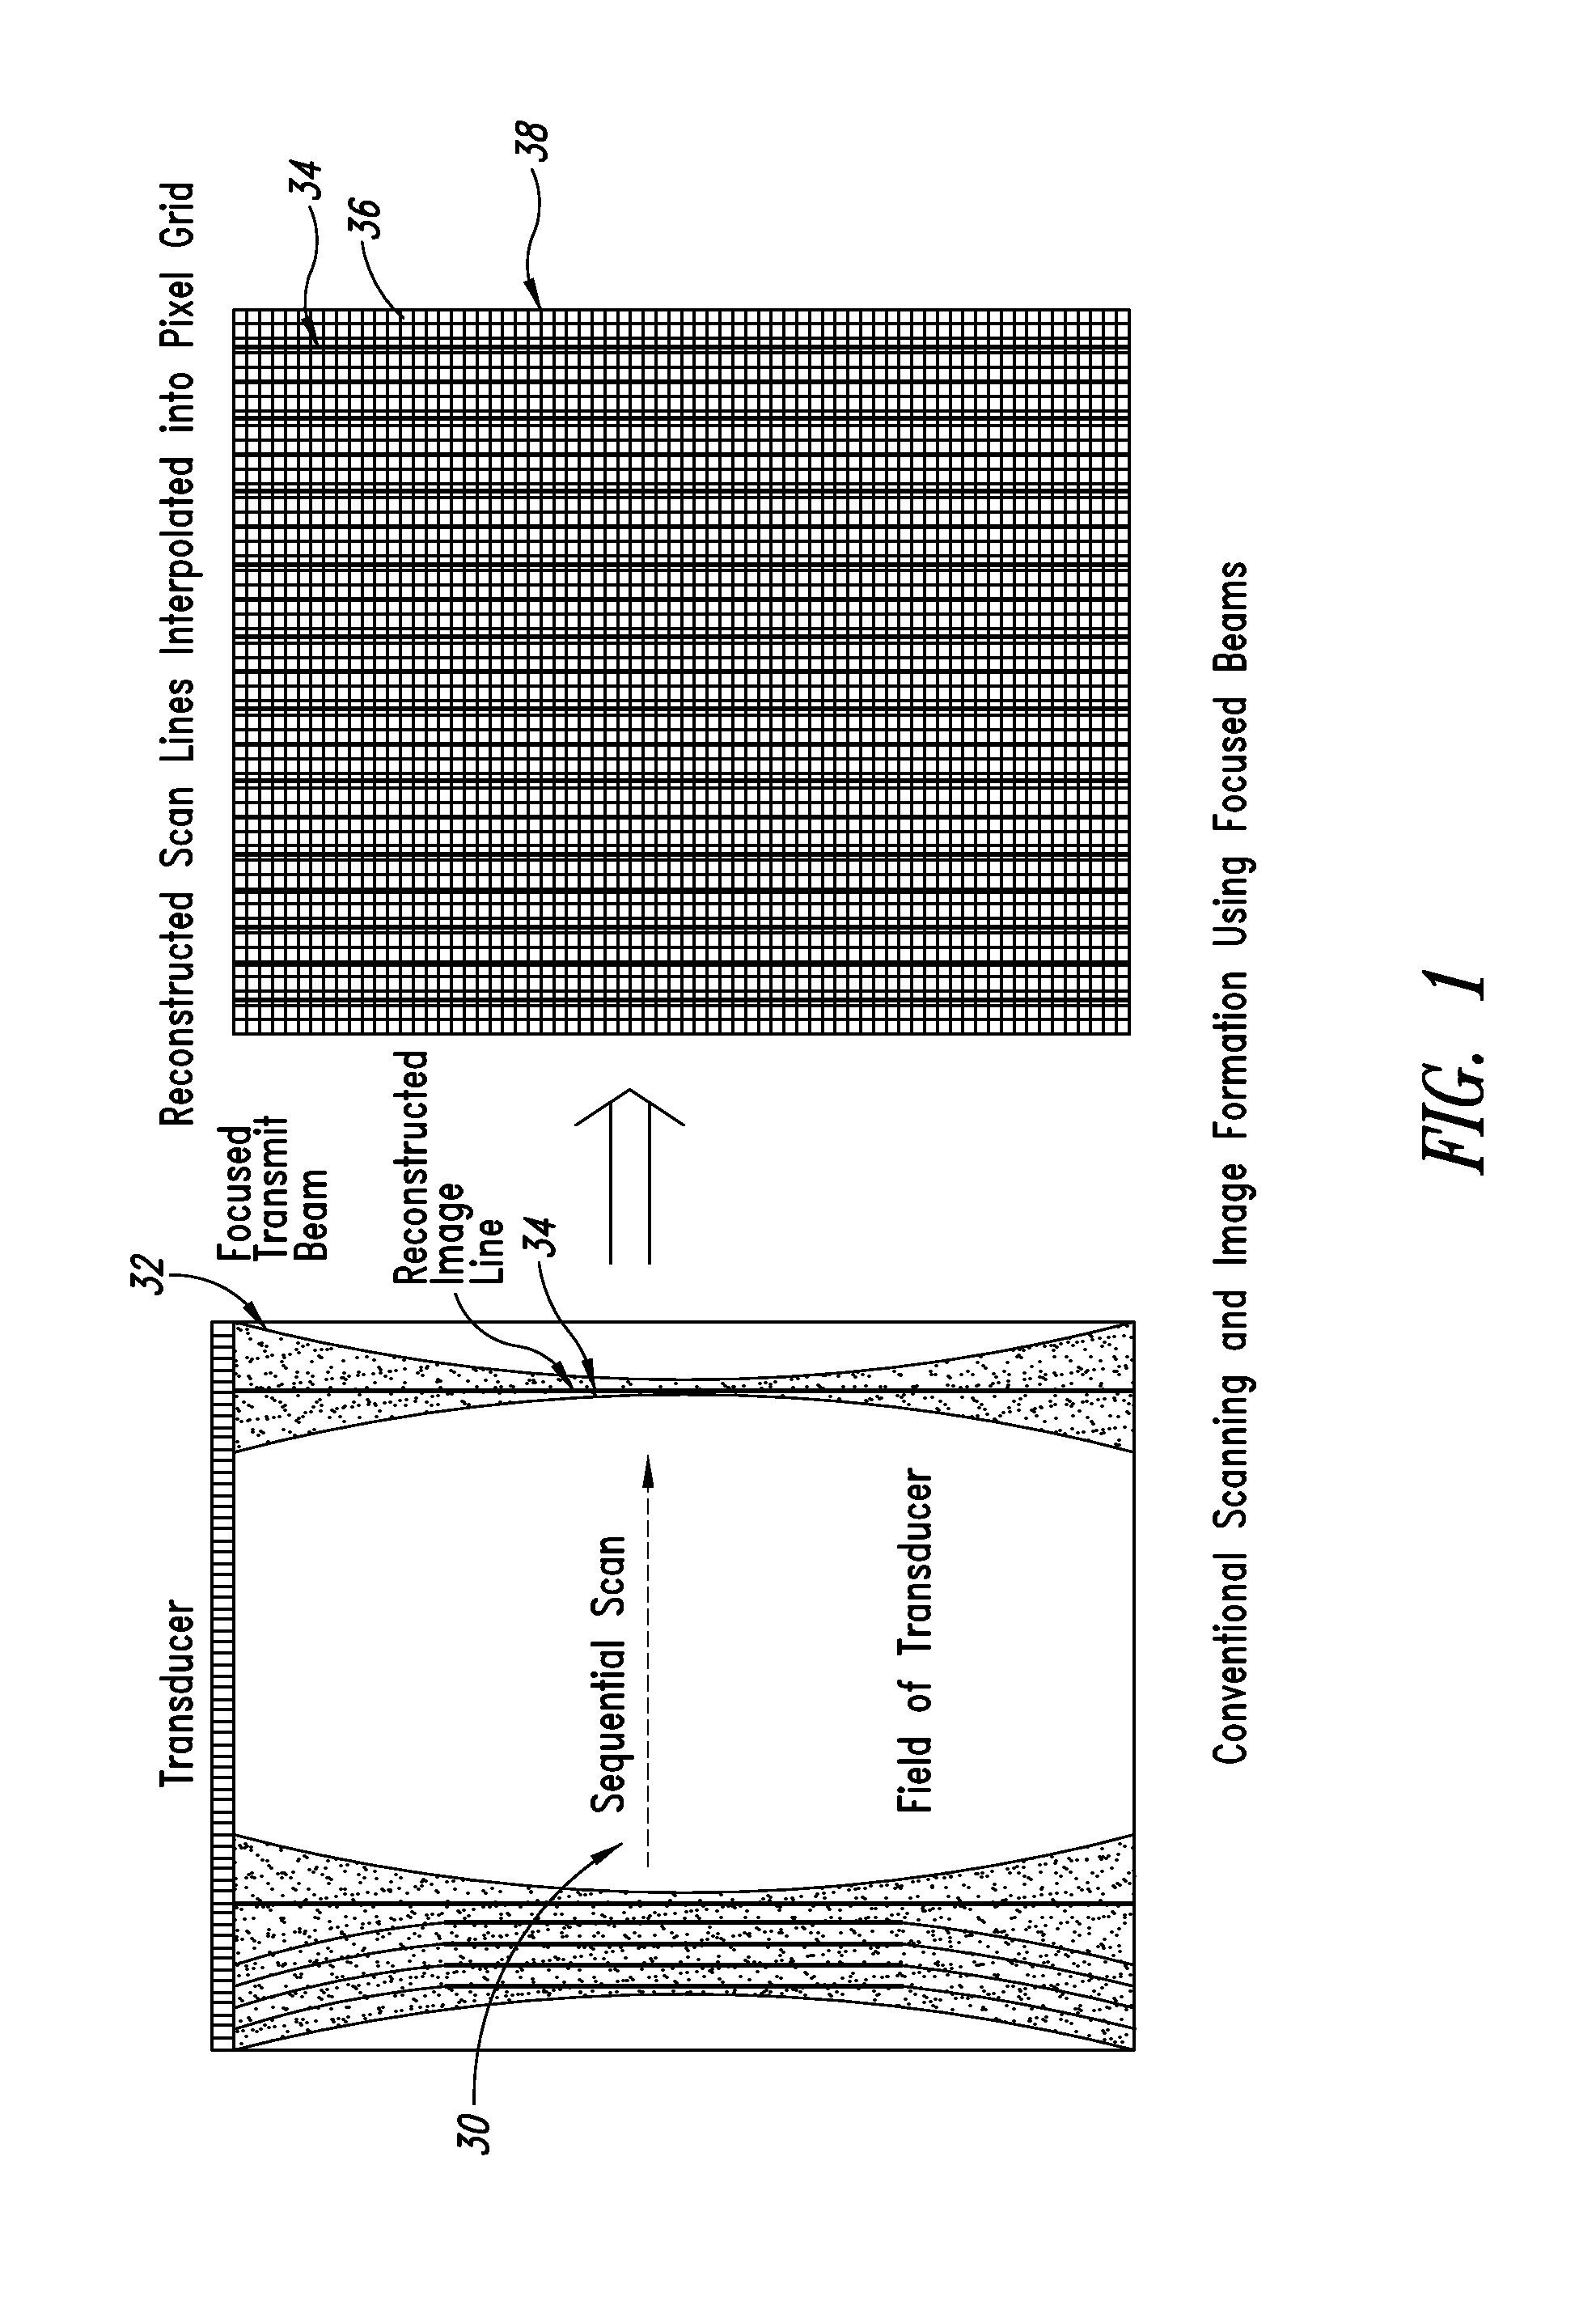 Enhanced ultrasound image formation using qualified regions of overlapping transmit beams